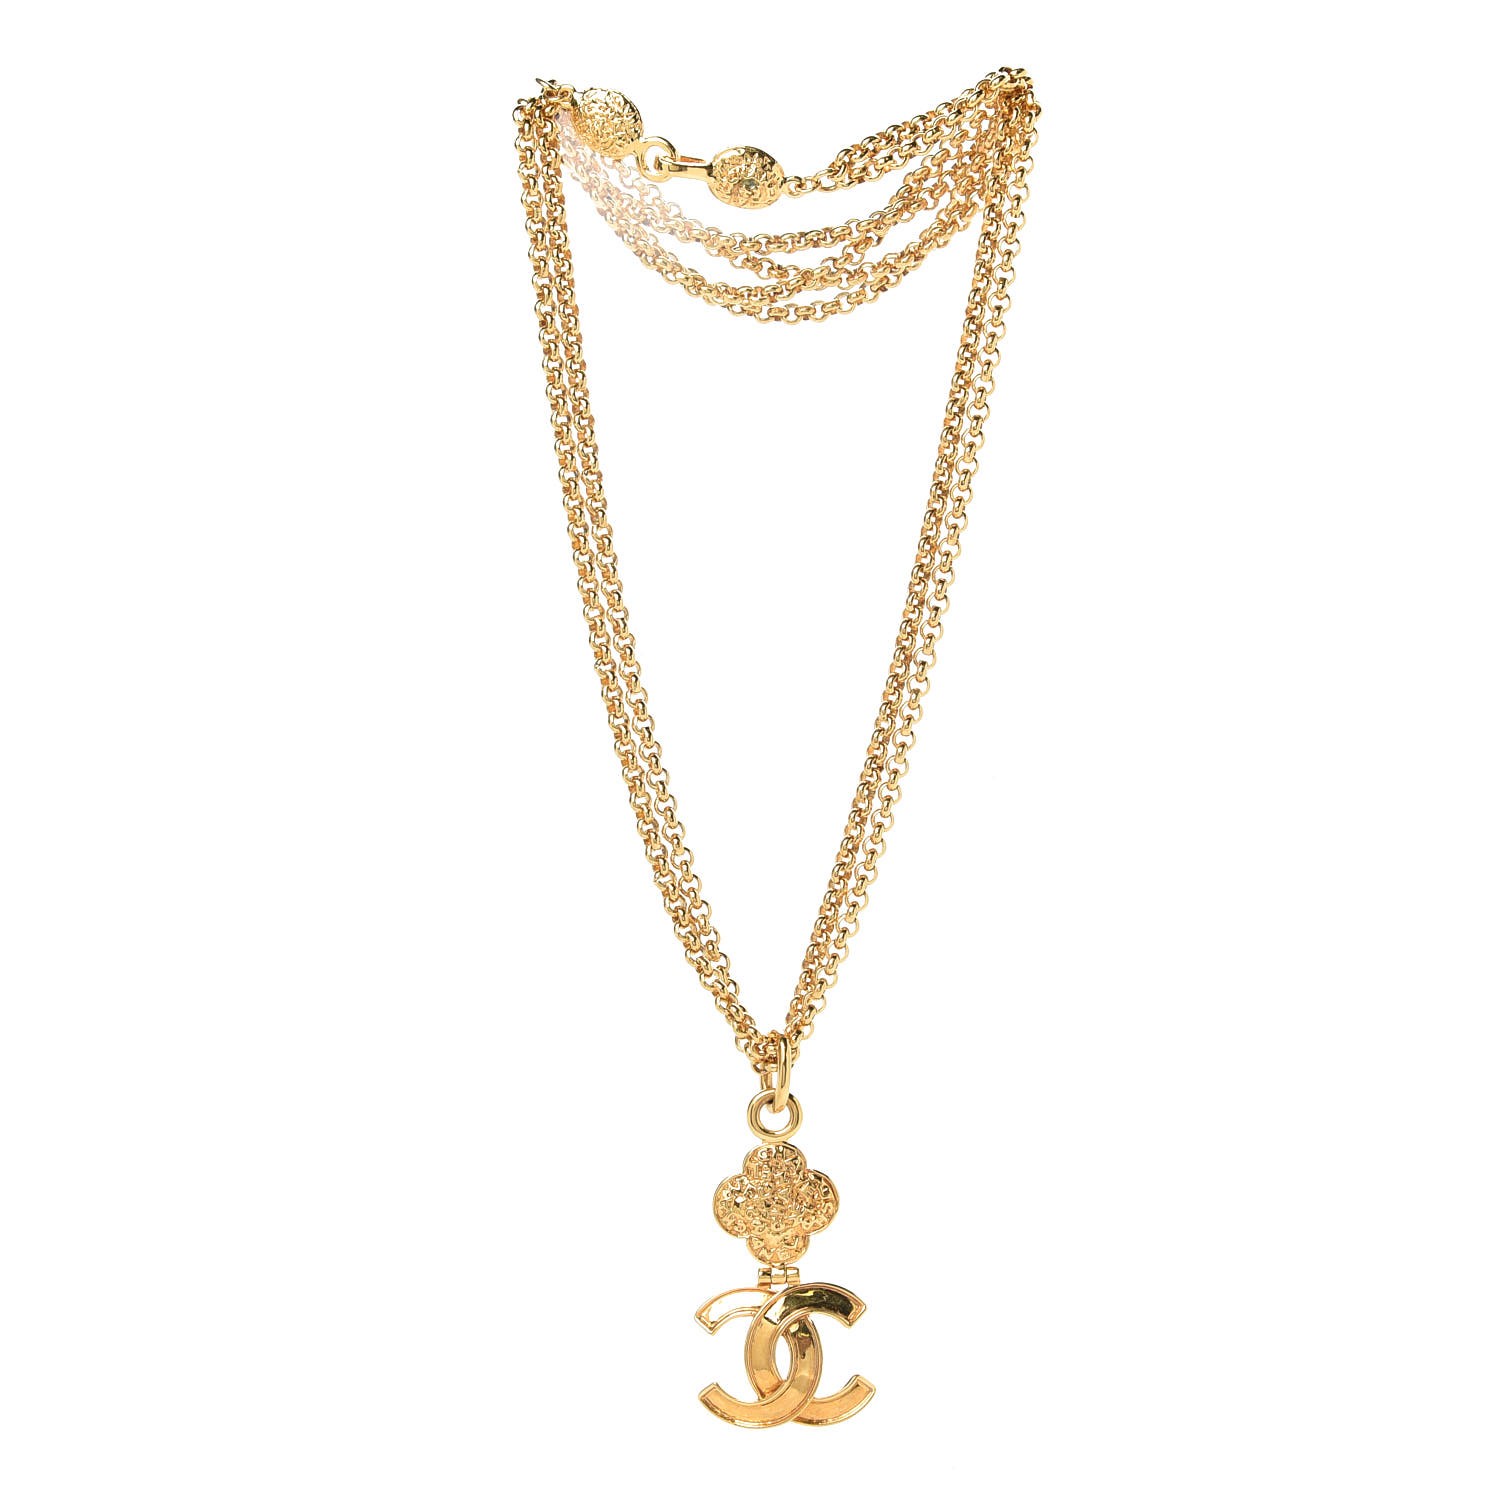 Chanel Metal Cc Double Chain Necklace Gold 314402